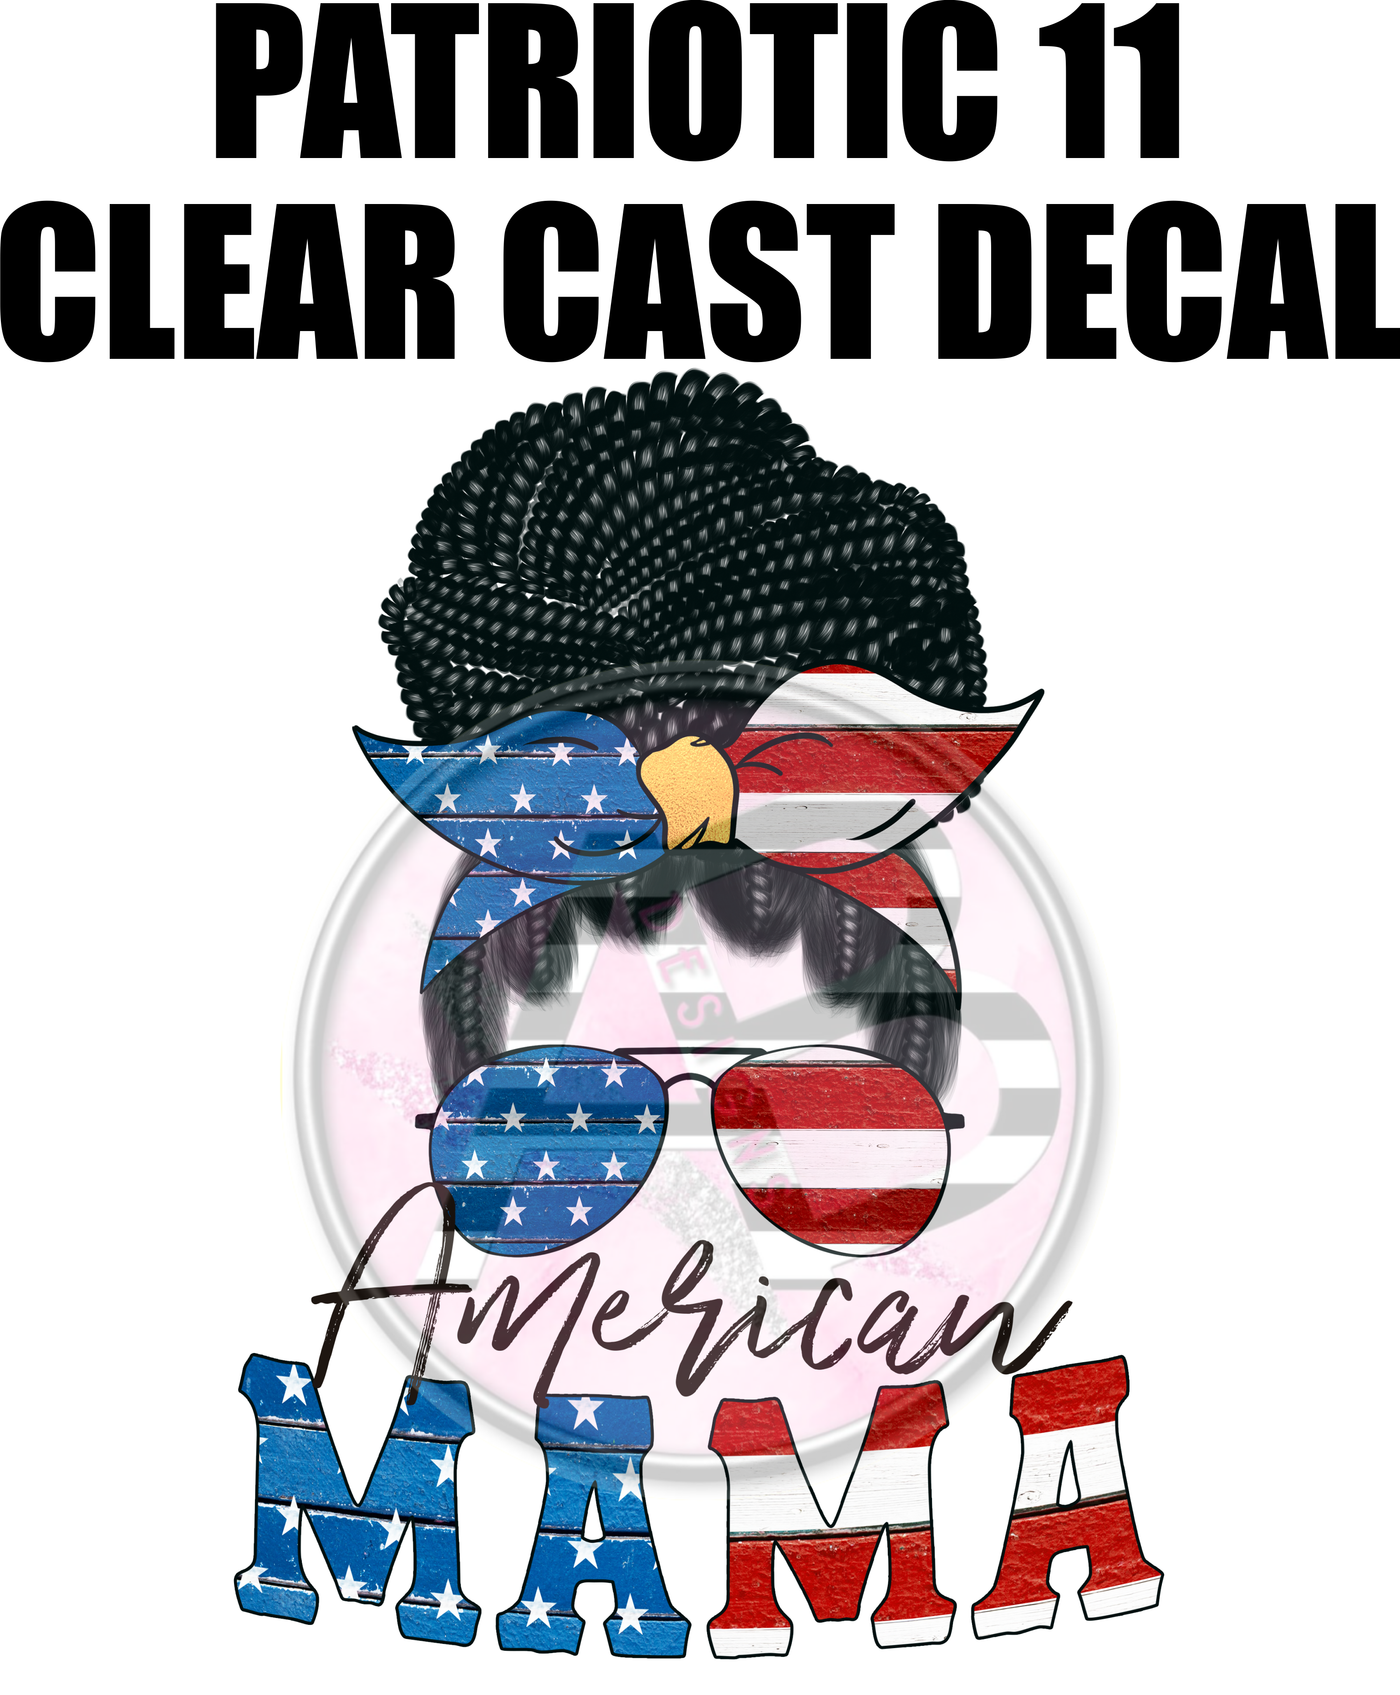 Patriotic 11 - Clear Cast Decal